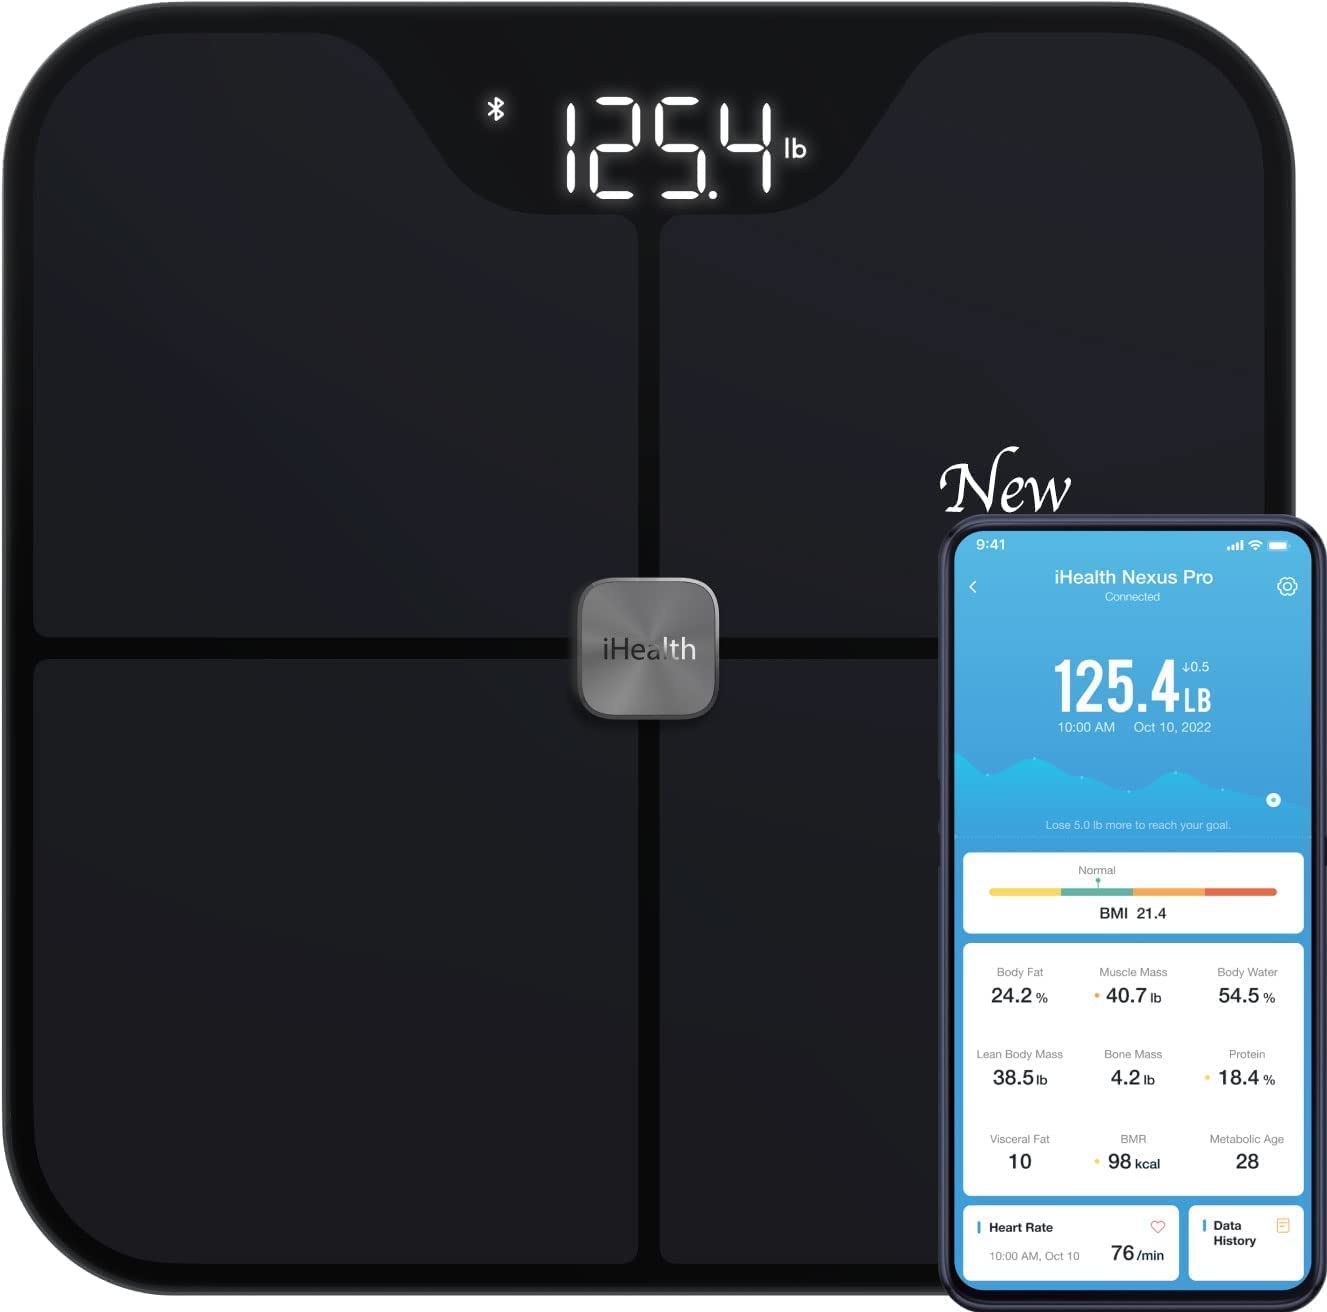  Wyze Smart Scale, Wireless Digital Bathroom Scale for Body  Weight, BMI, Body Fat Percentage, Heart Rate Monitor, App Connected,  Bluetooth, 400 lb Capacity (Black) : Health & Household